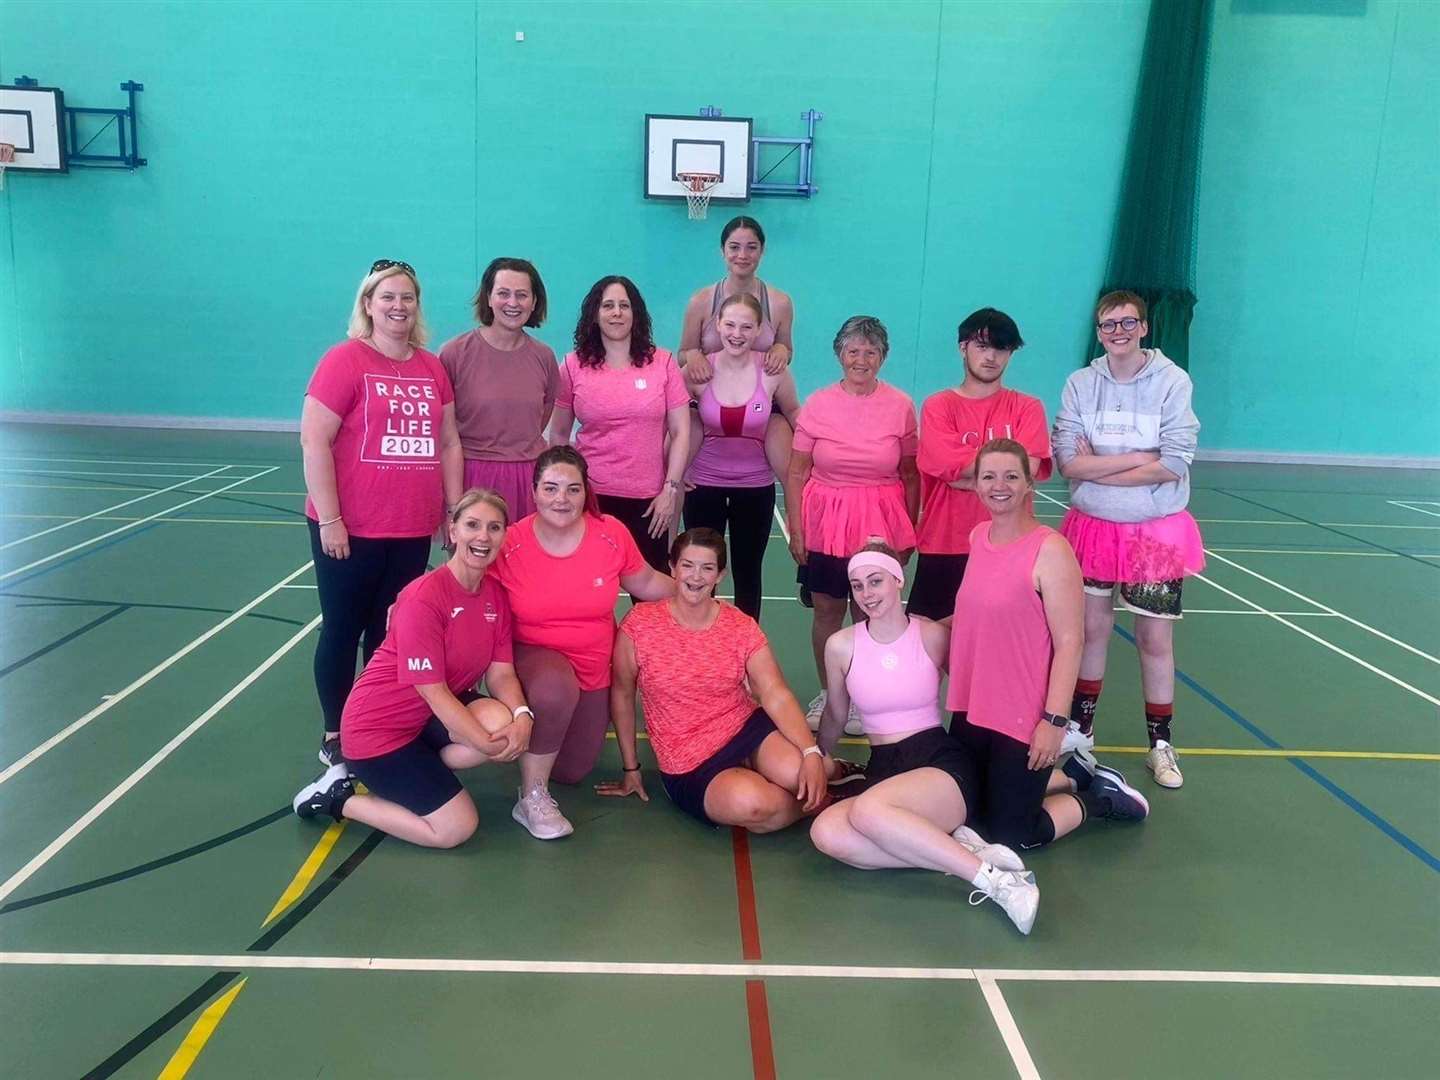 Team Forres Ball Busters was formed from netball sessions at Forres House.